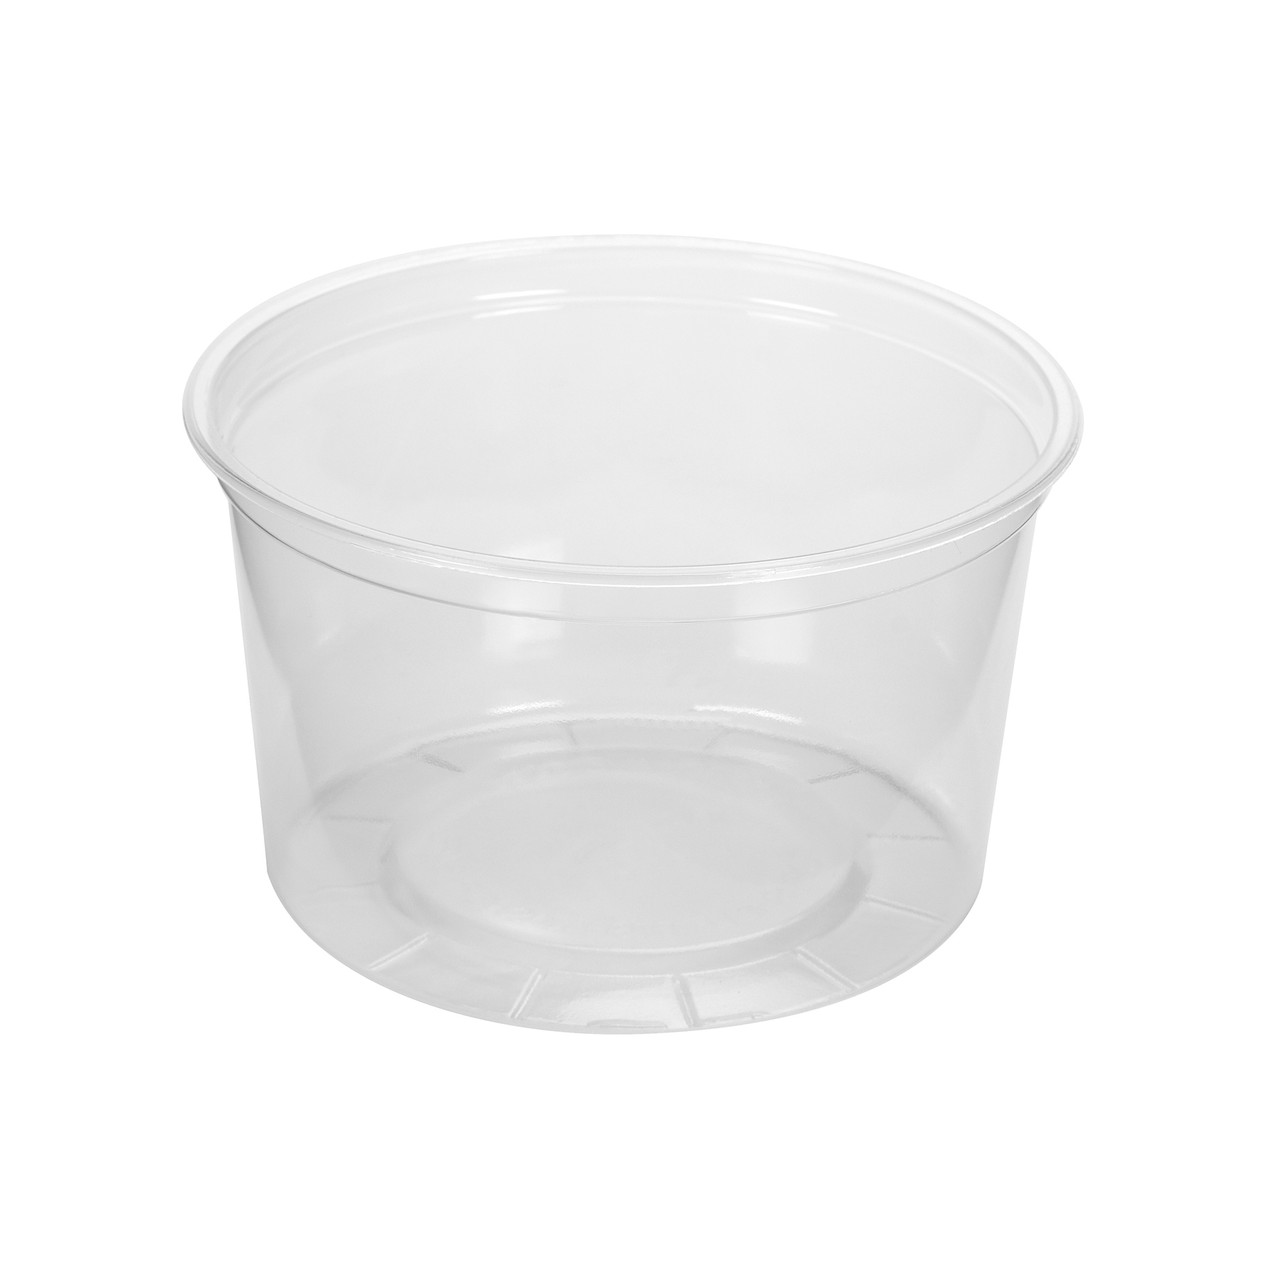 Deli Containers 16 fl oz (473ml) Clear Deli Container (in printed retail bags) (ADS16)